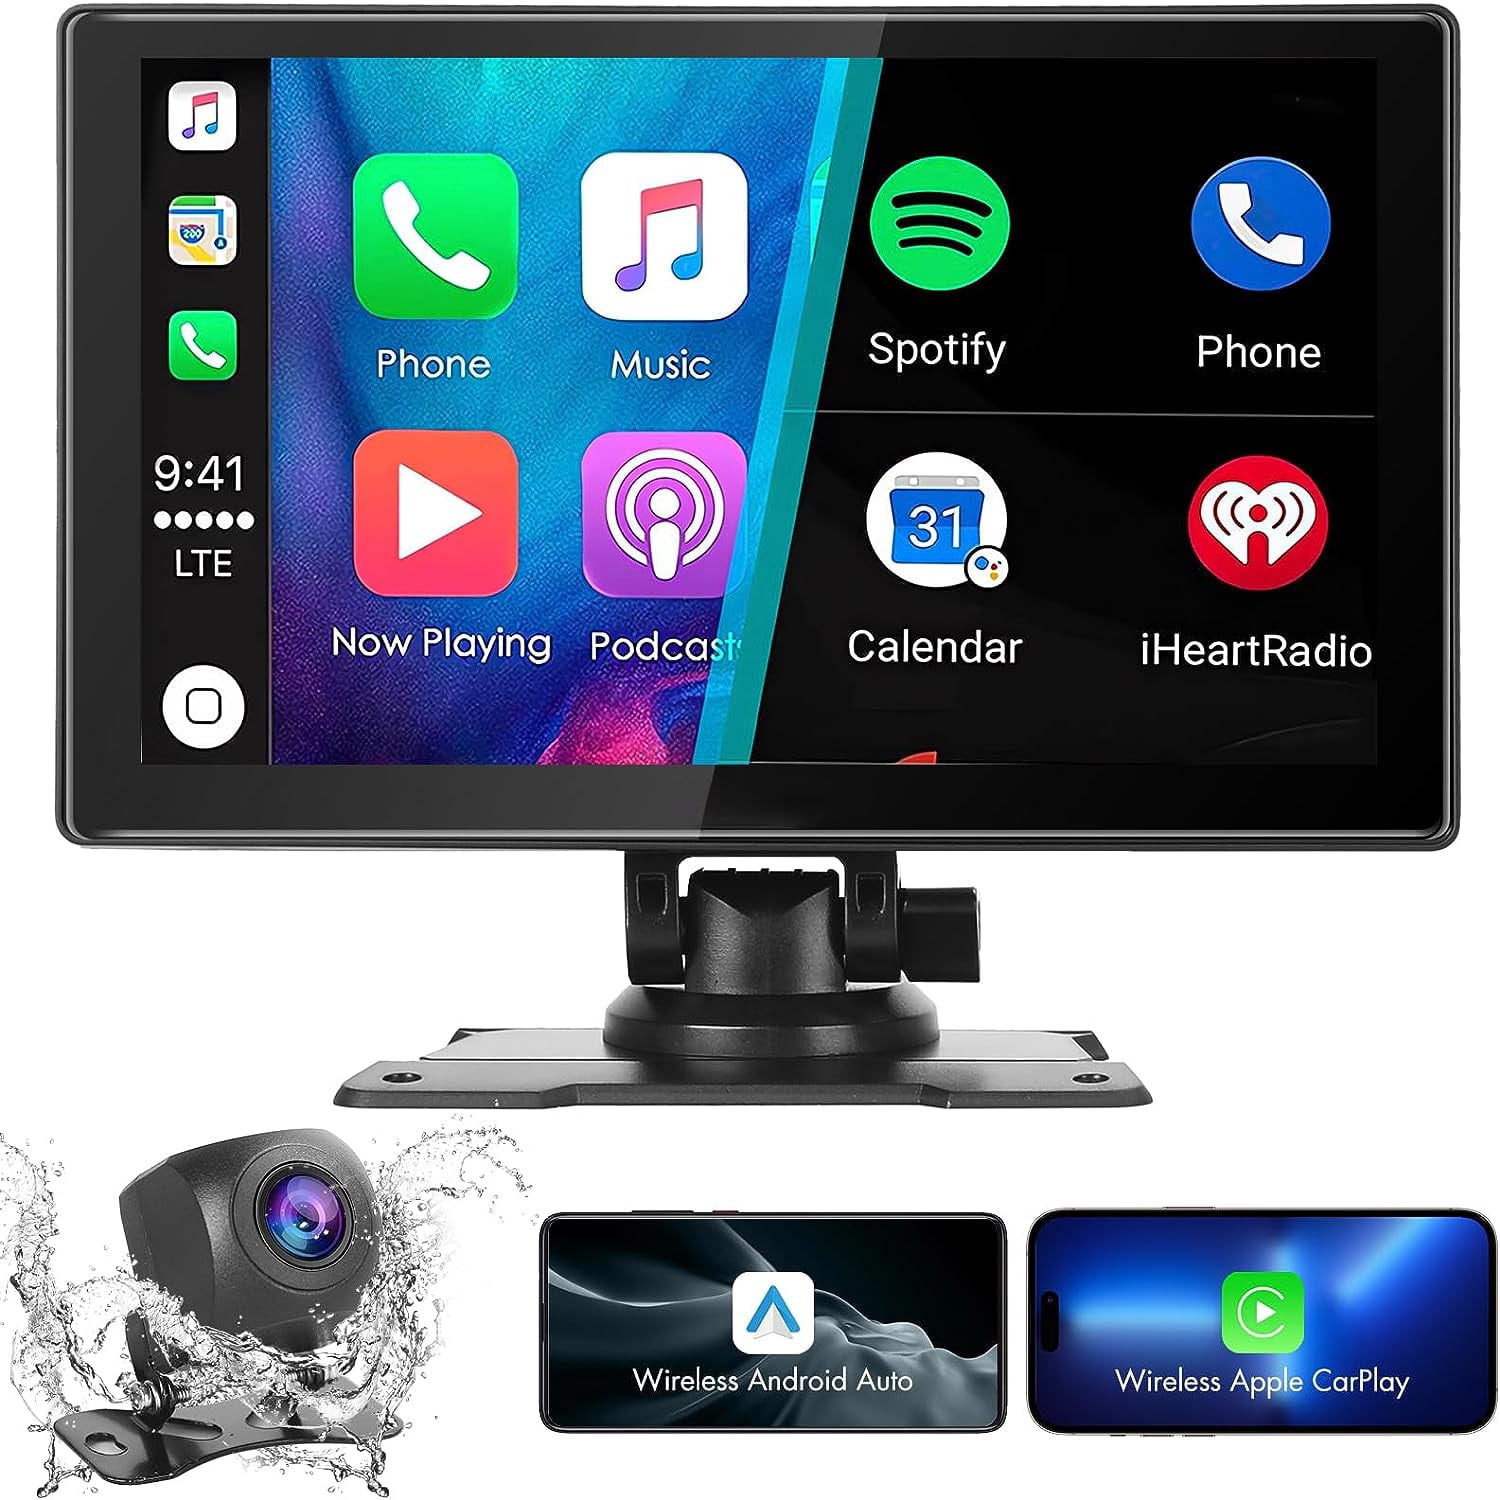 Wireless Apple CarPlay Dash Mount Portable Car Stereo, Android Auto,  9.33-Inch FHD Touchscreen Car Audio Receiver, Drivemate, Car Buddy with  Voice Control, AUX/AV IN/USB, AHD Rear View Camera 